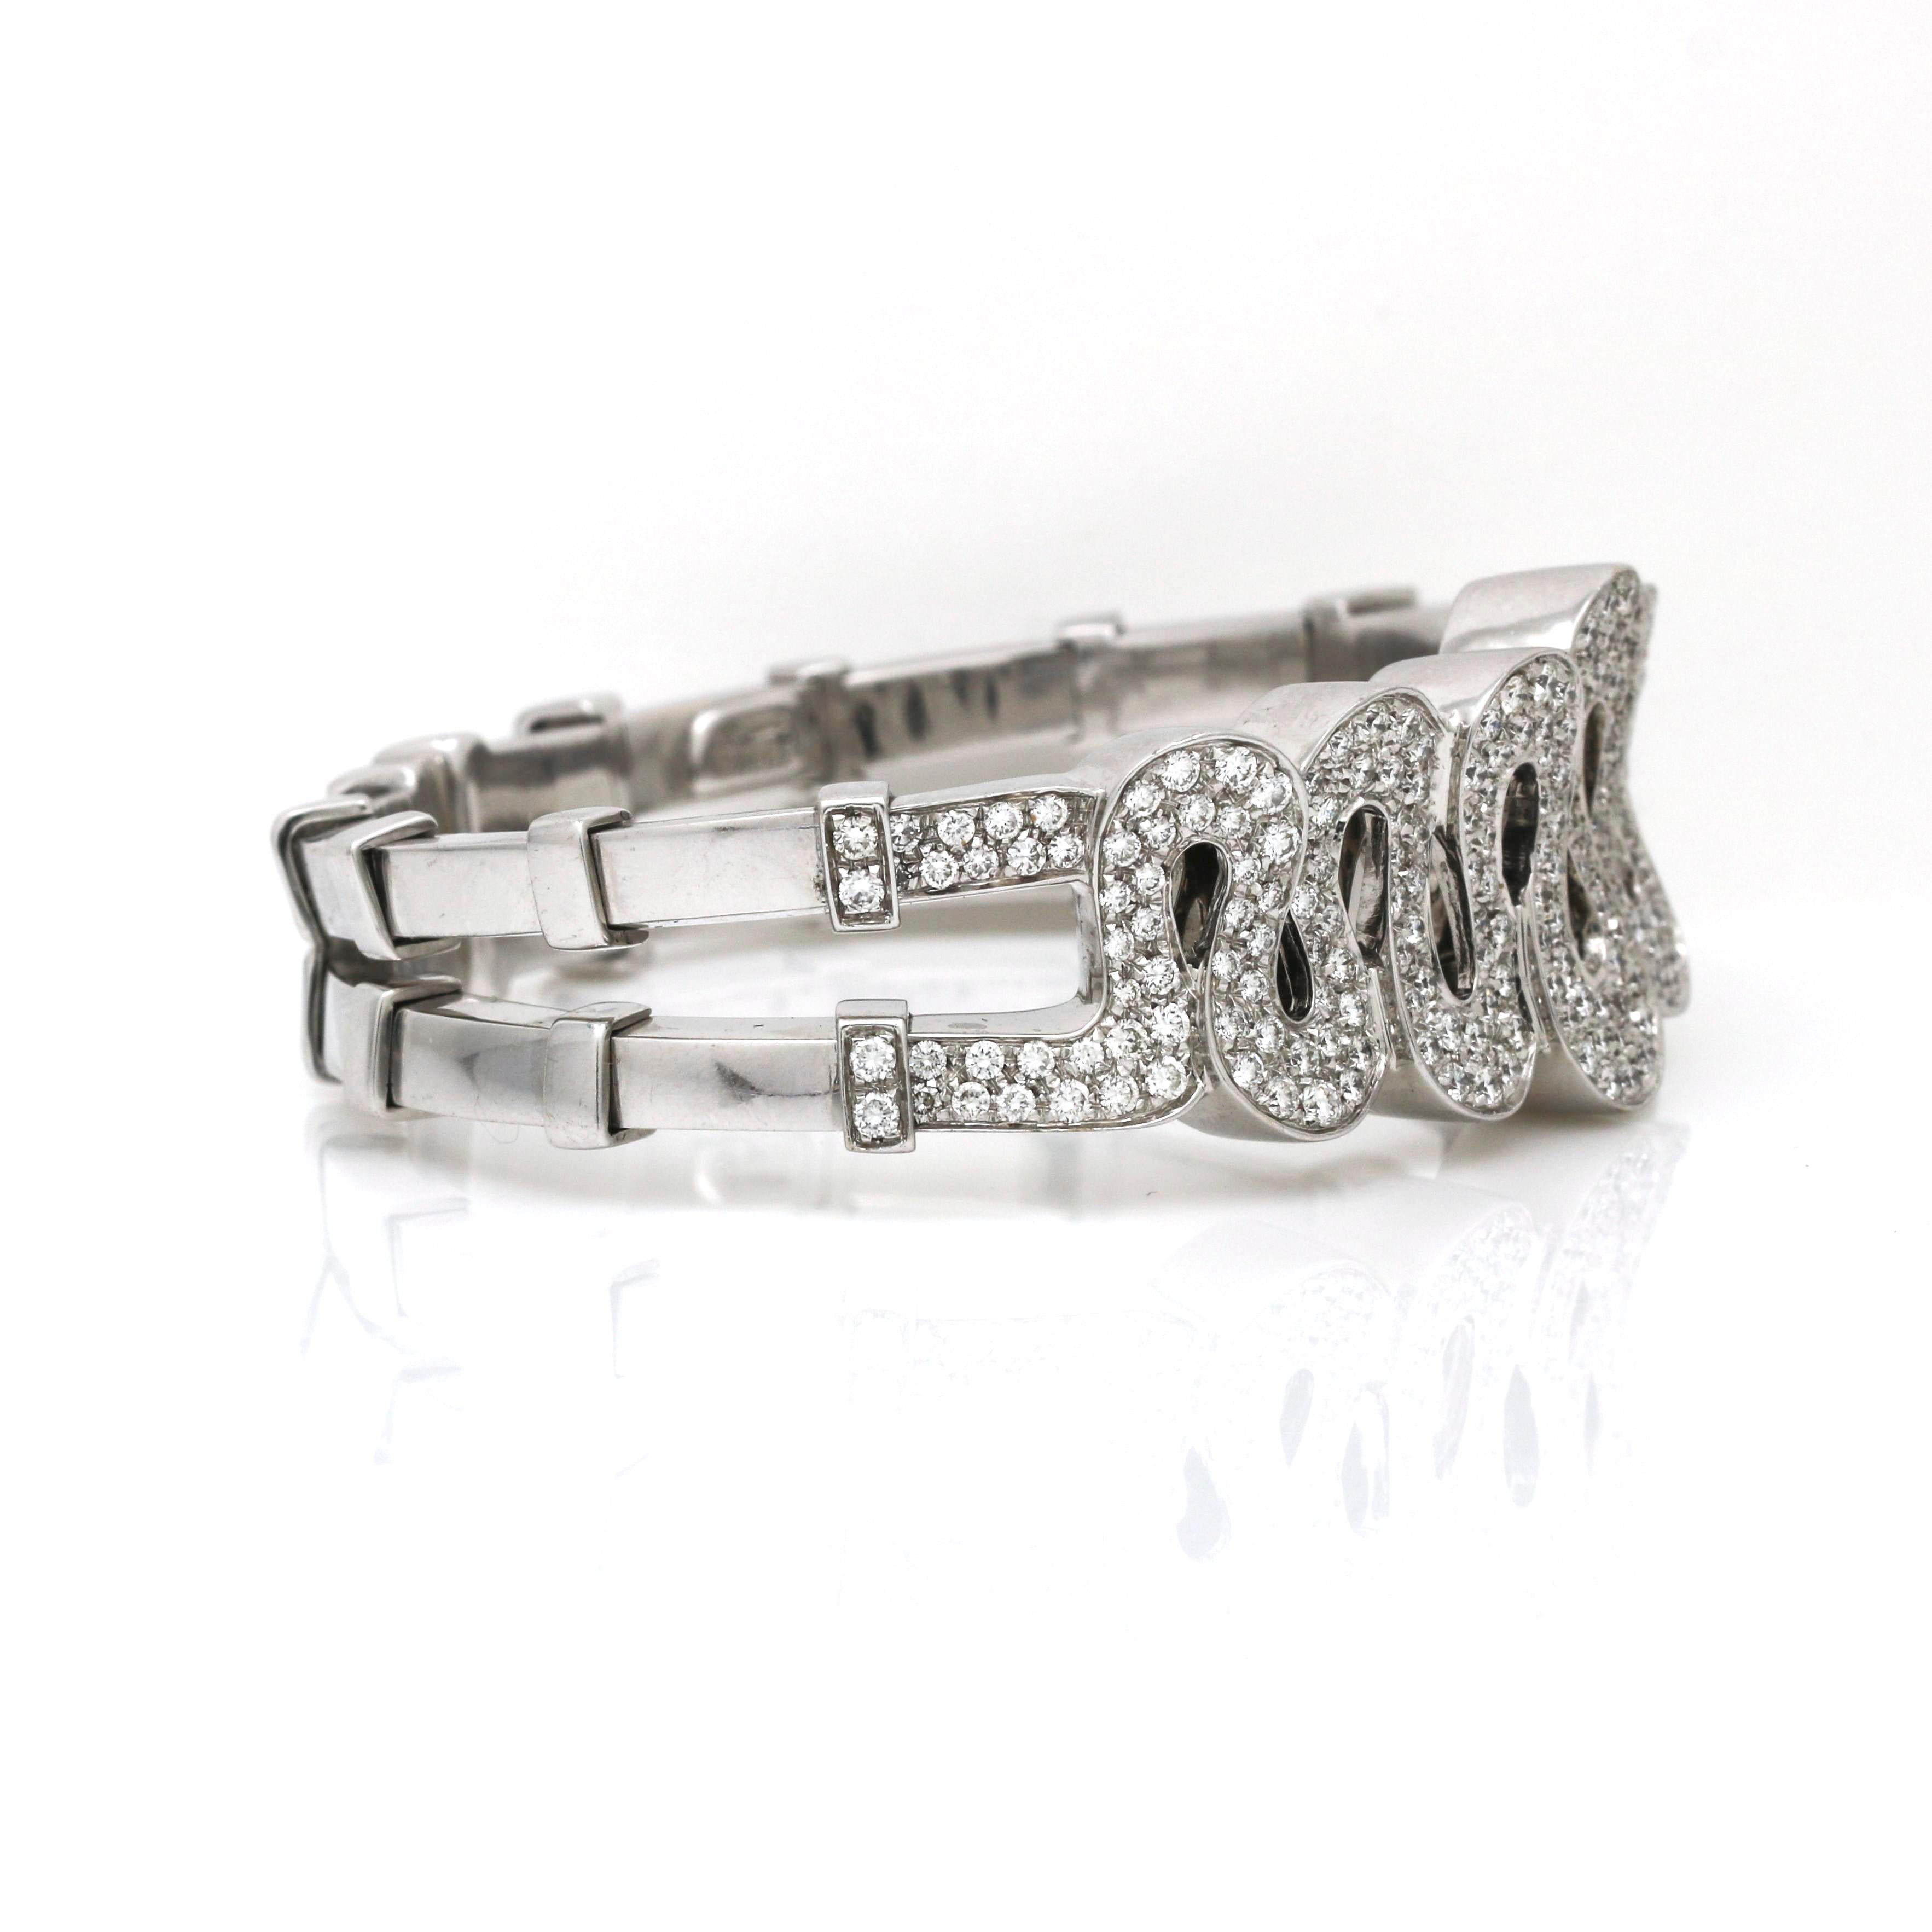 Stunning diamond statement bracelet crafted in 18k white gold in excellent condition. The bangle is signed M, but the trademark number is unclear. It is made in Italy, has superior craftsmanship, and has beautiful, high-quality stones—a very stylish